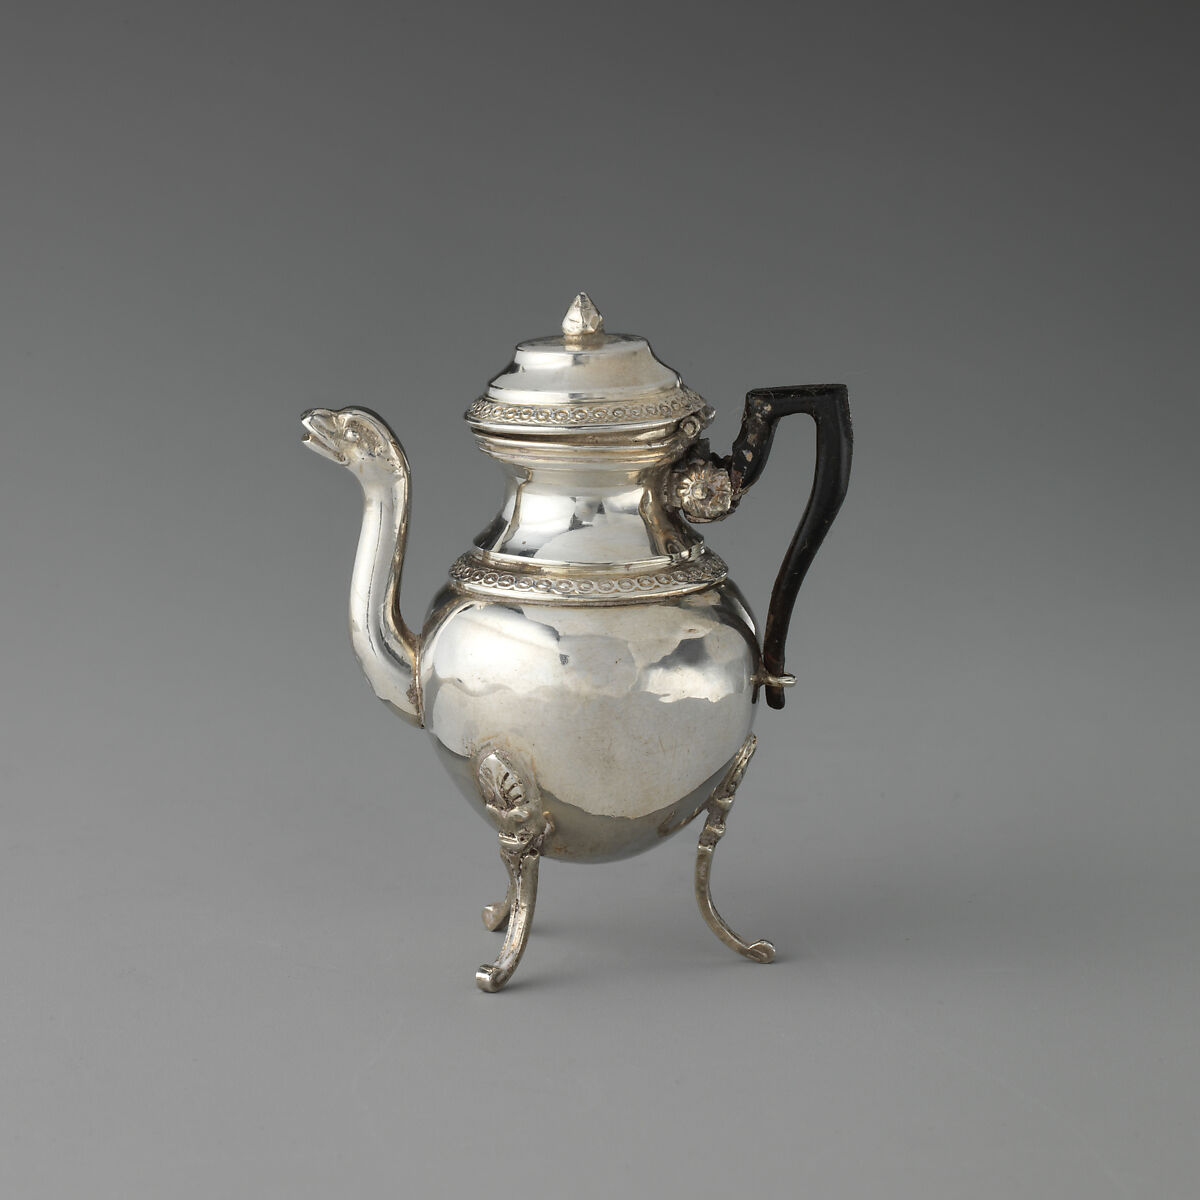 Miniature teapot, Silver, wood, French 